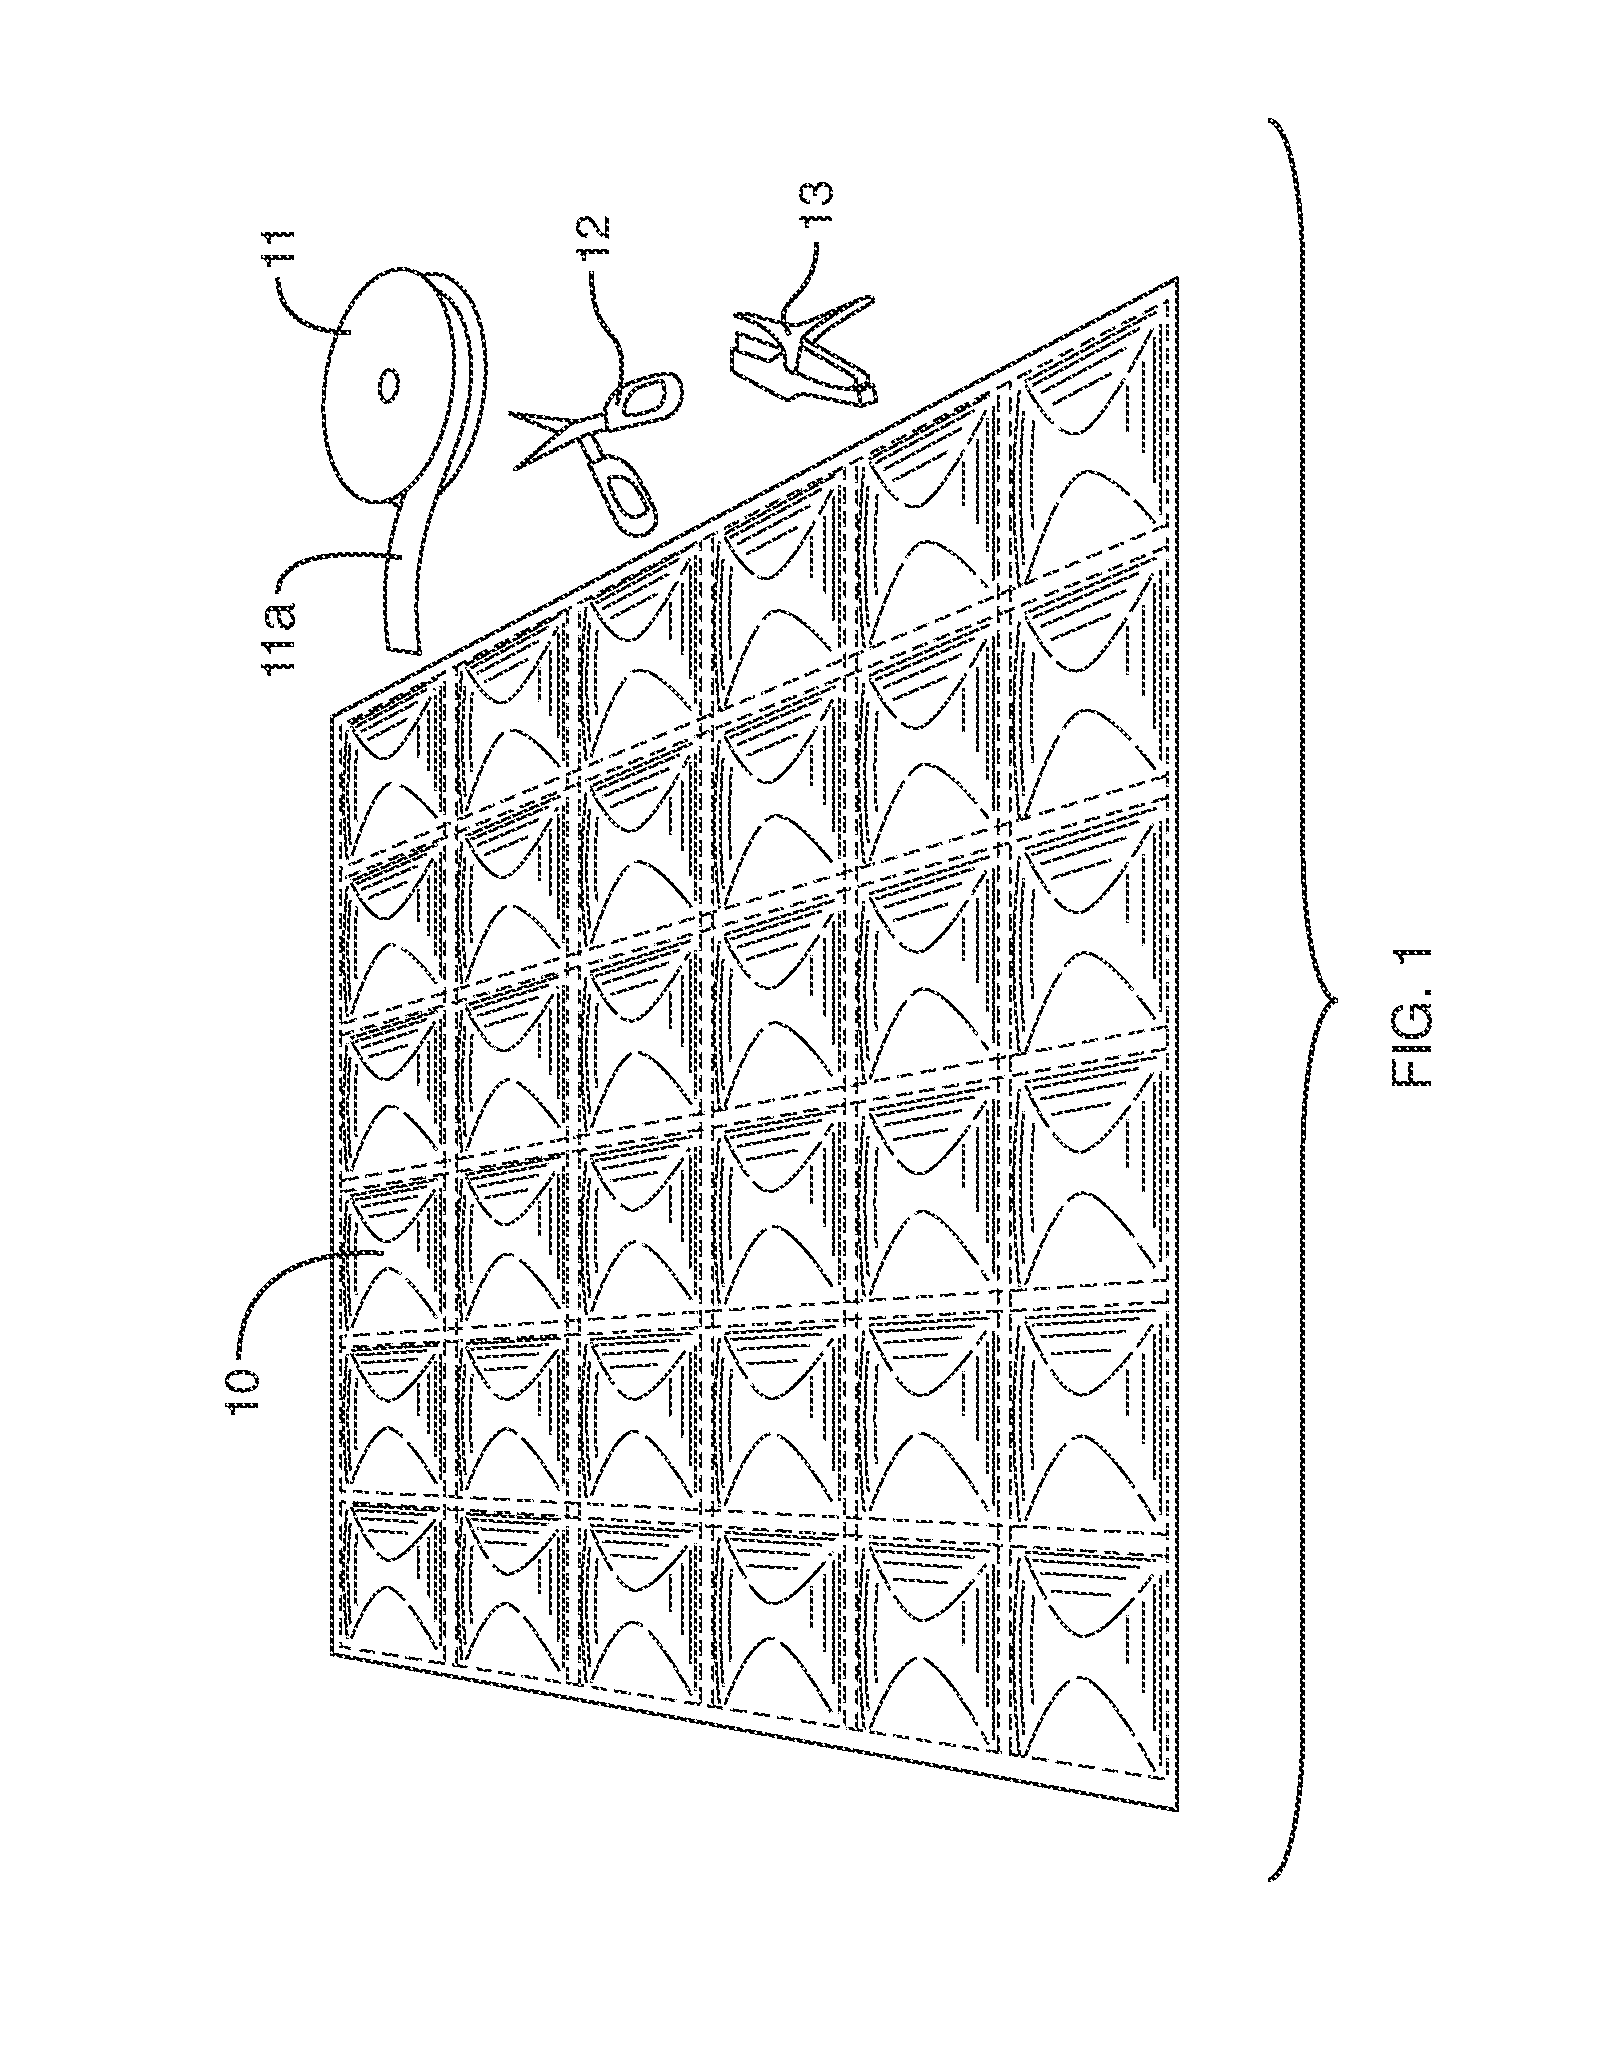 Low permeance segmented insulative device and related kit